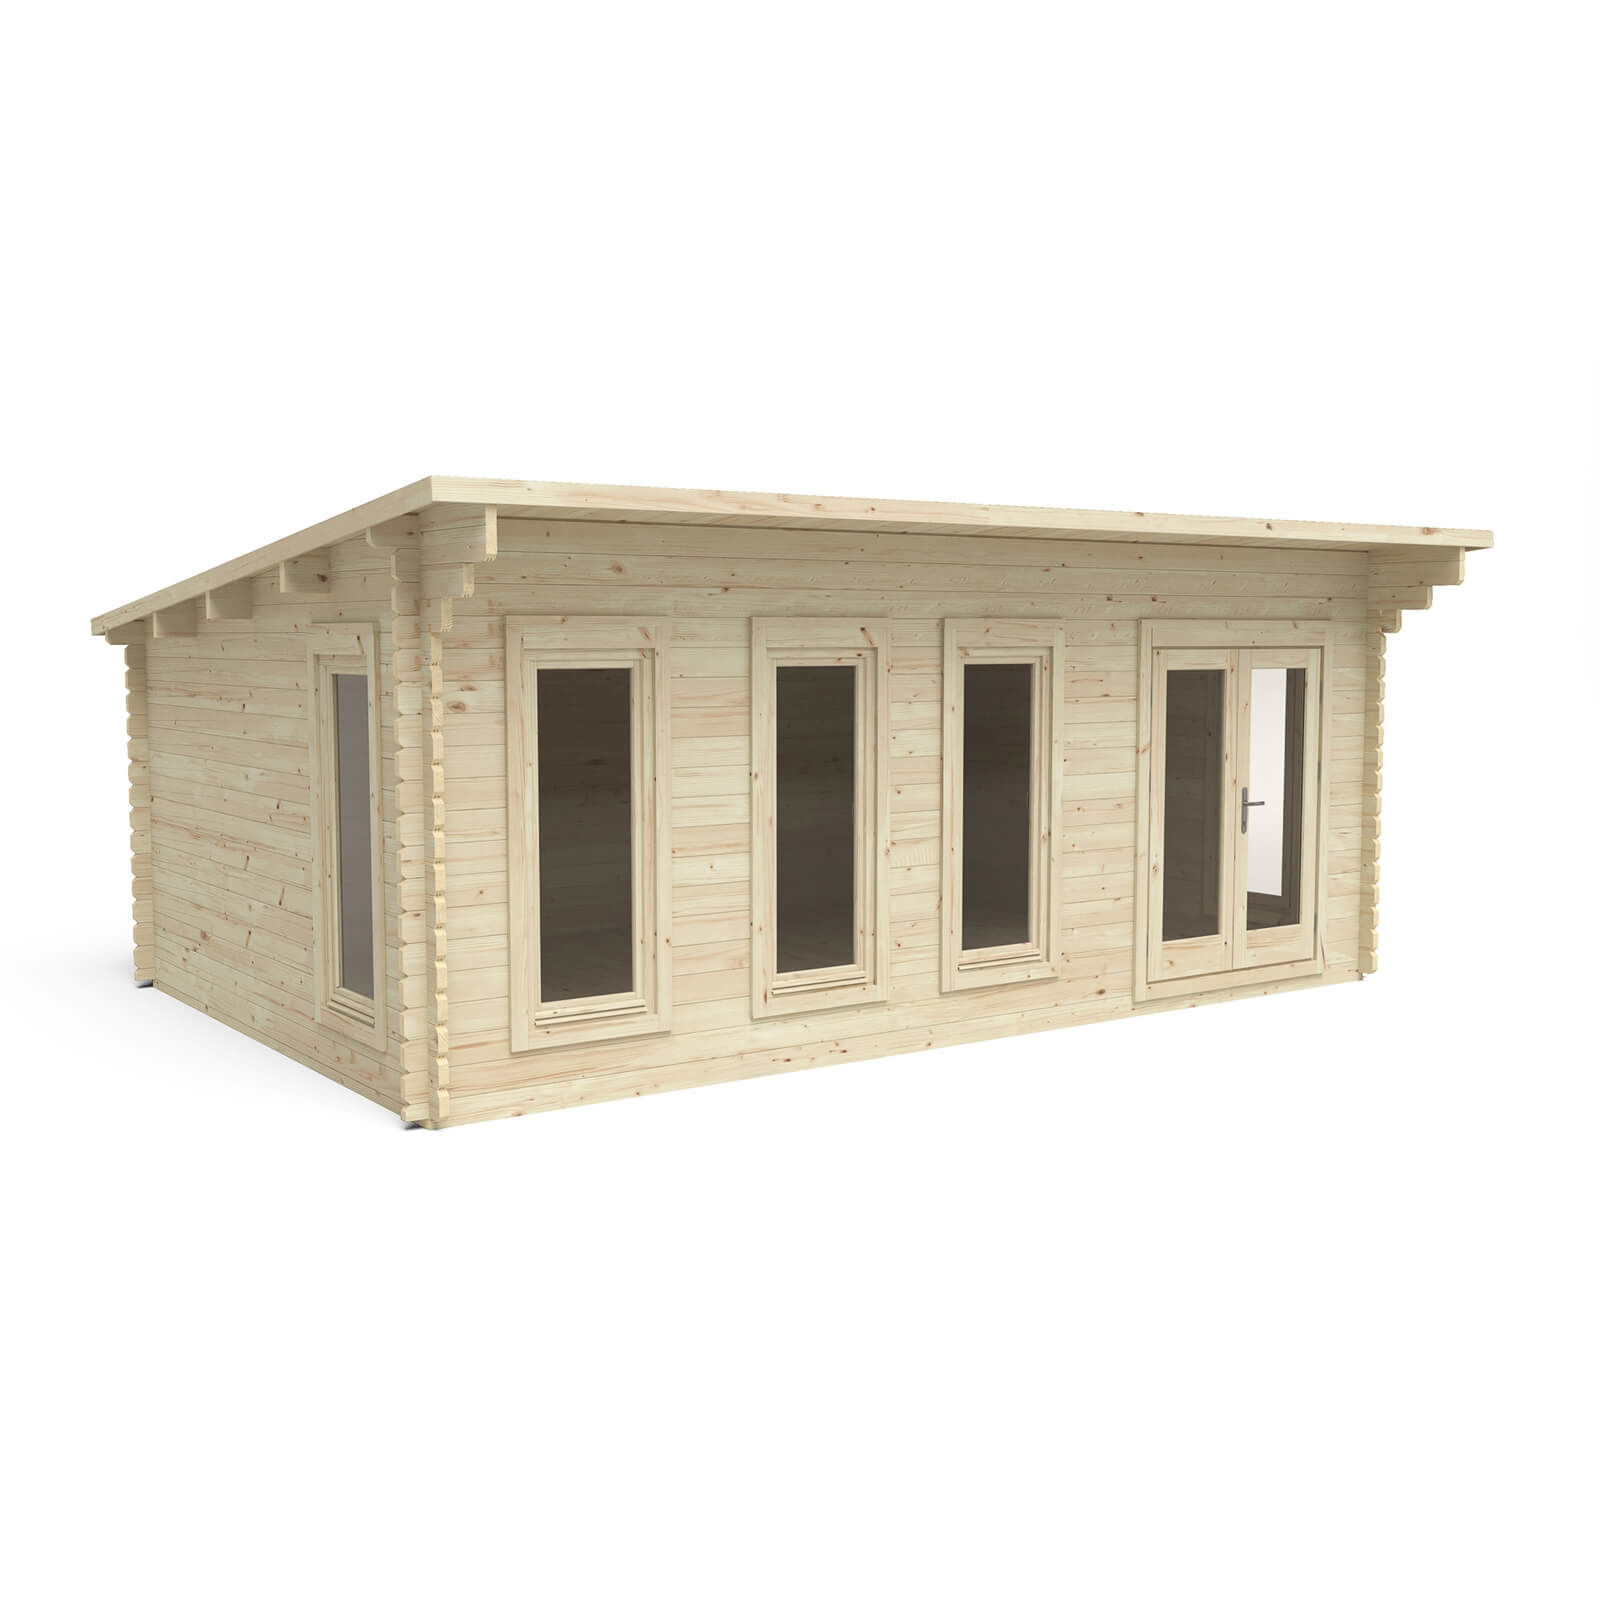 Forest Wolverley 6.0m x 4.0m Log Cabin Double Glazed 34kg Polyester Felt, Plus Underlay - Installation Included